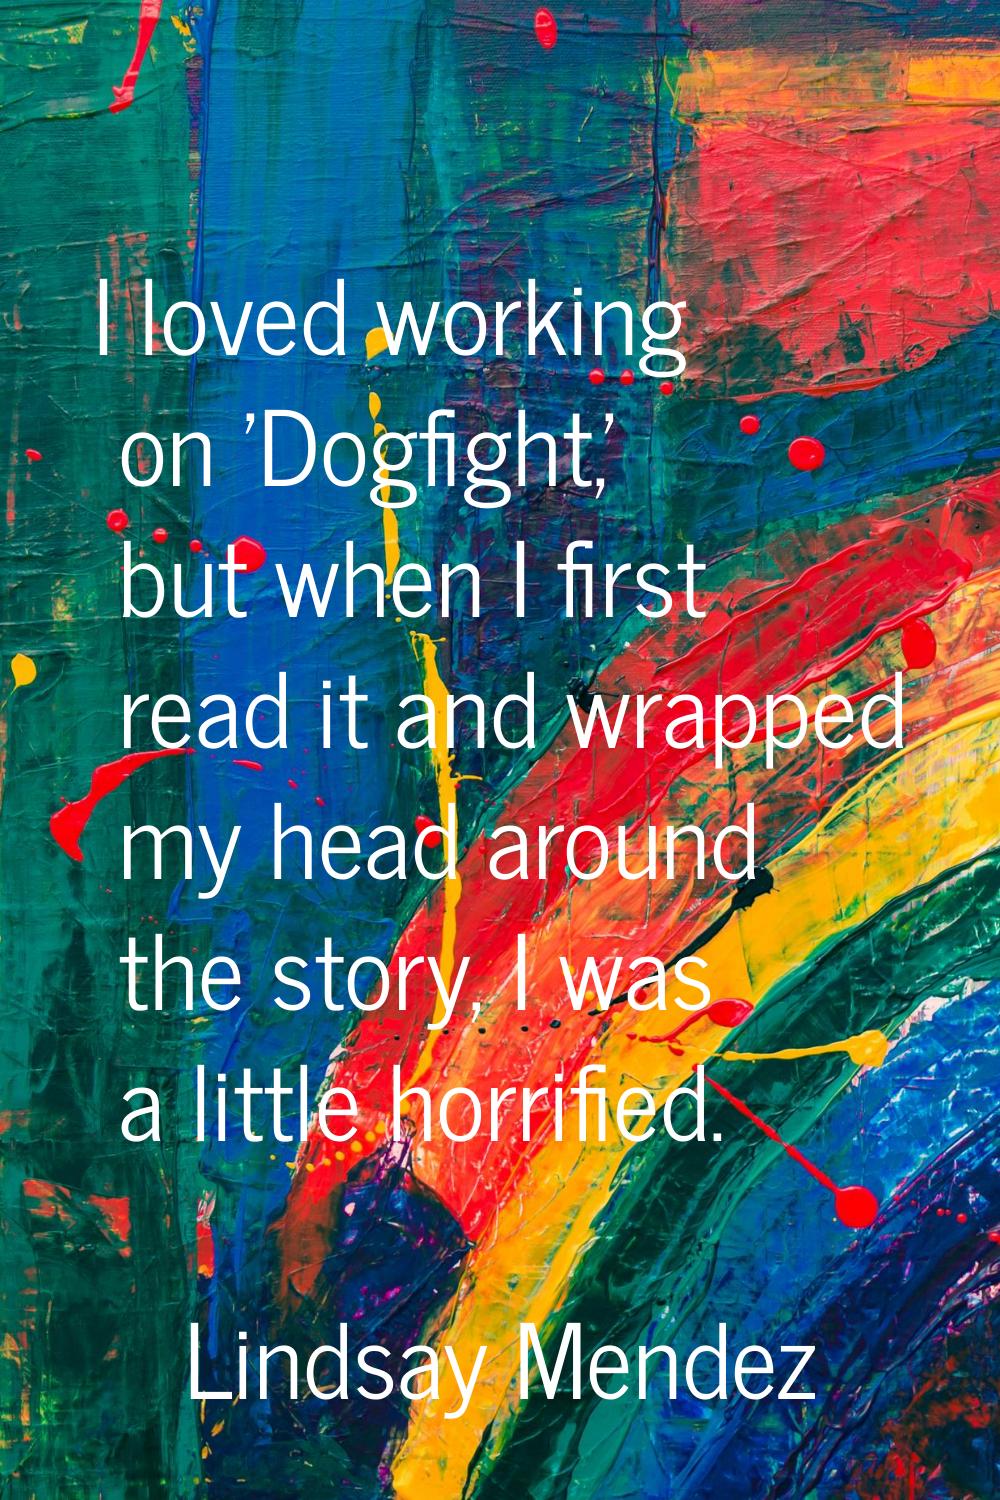 I loved working on 'Dogfight,' but when I first read it and wrapped my head around the story, I was